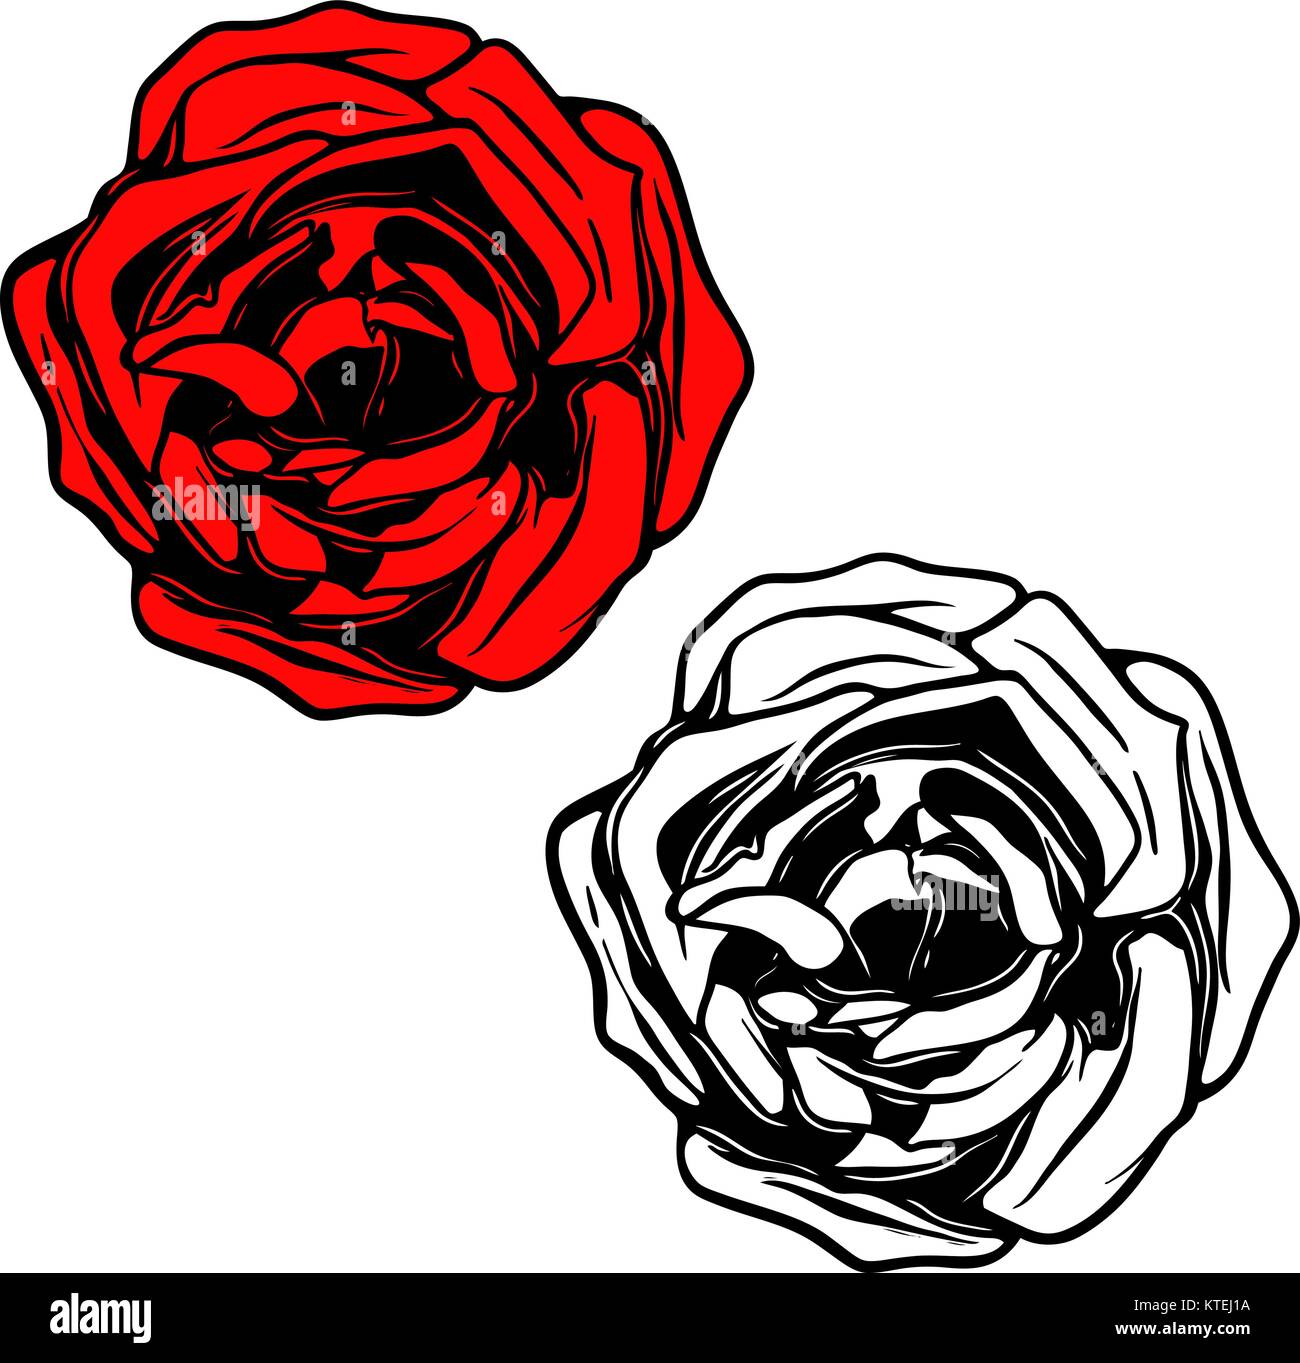 9080 Rose Banner Tattoo Images Stock Photos  Vectors  Shutterstock